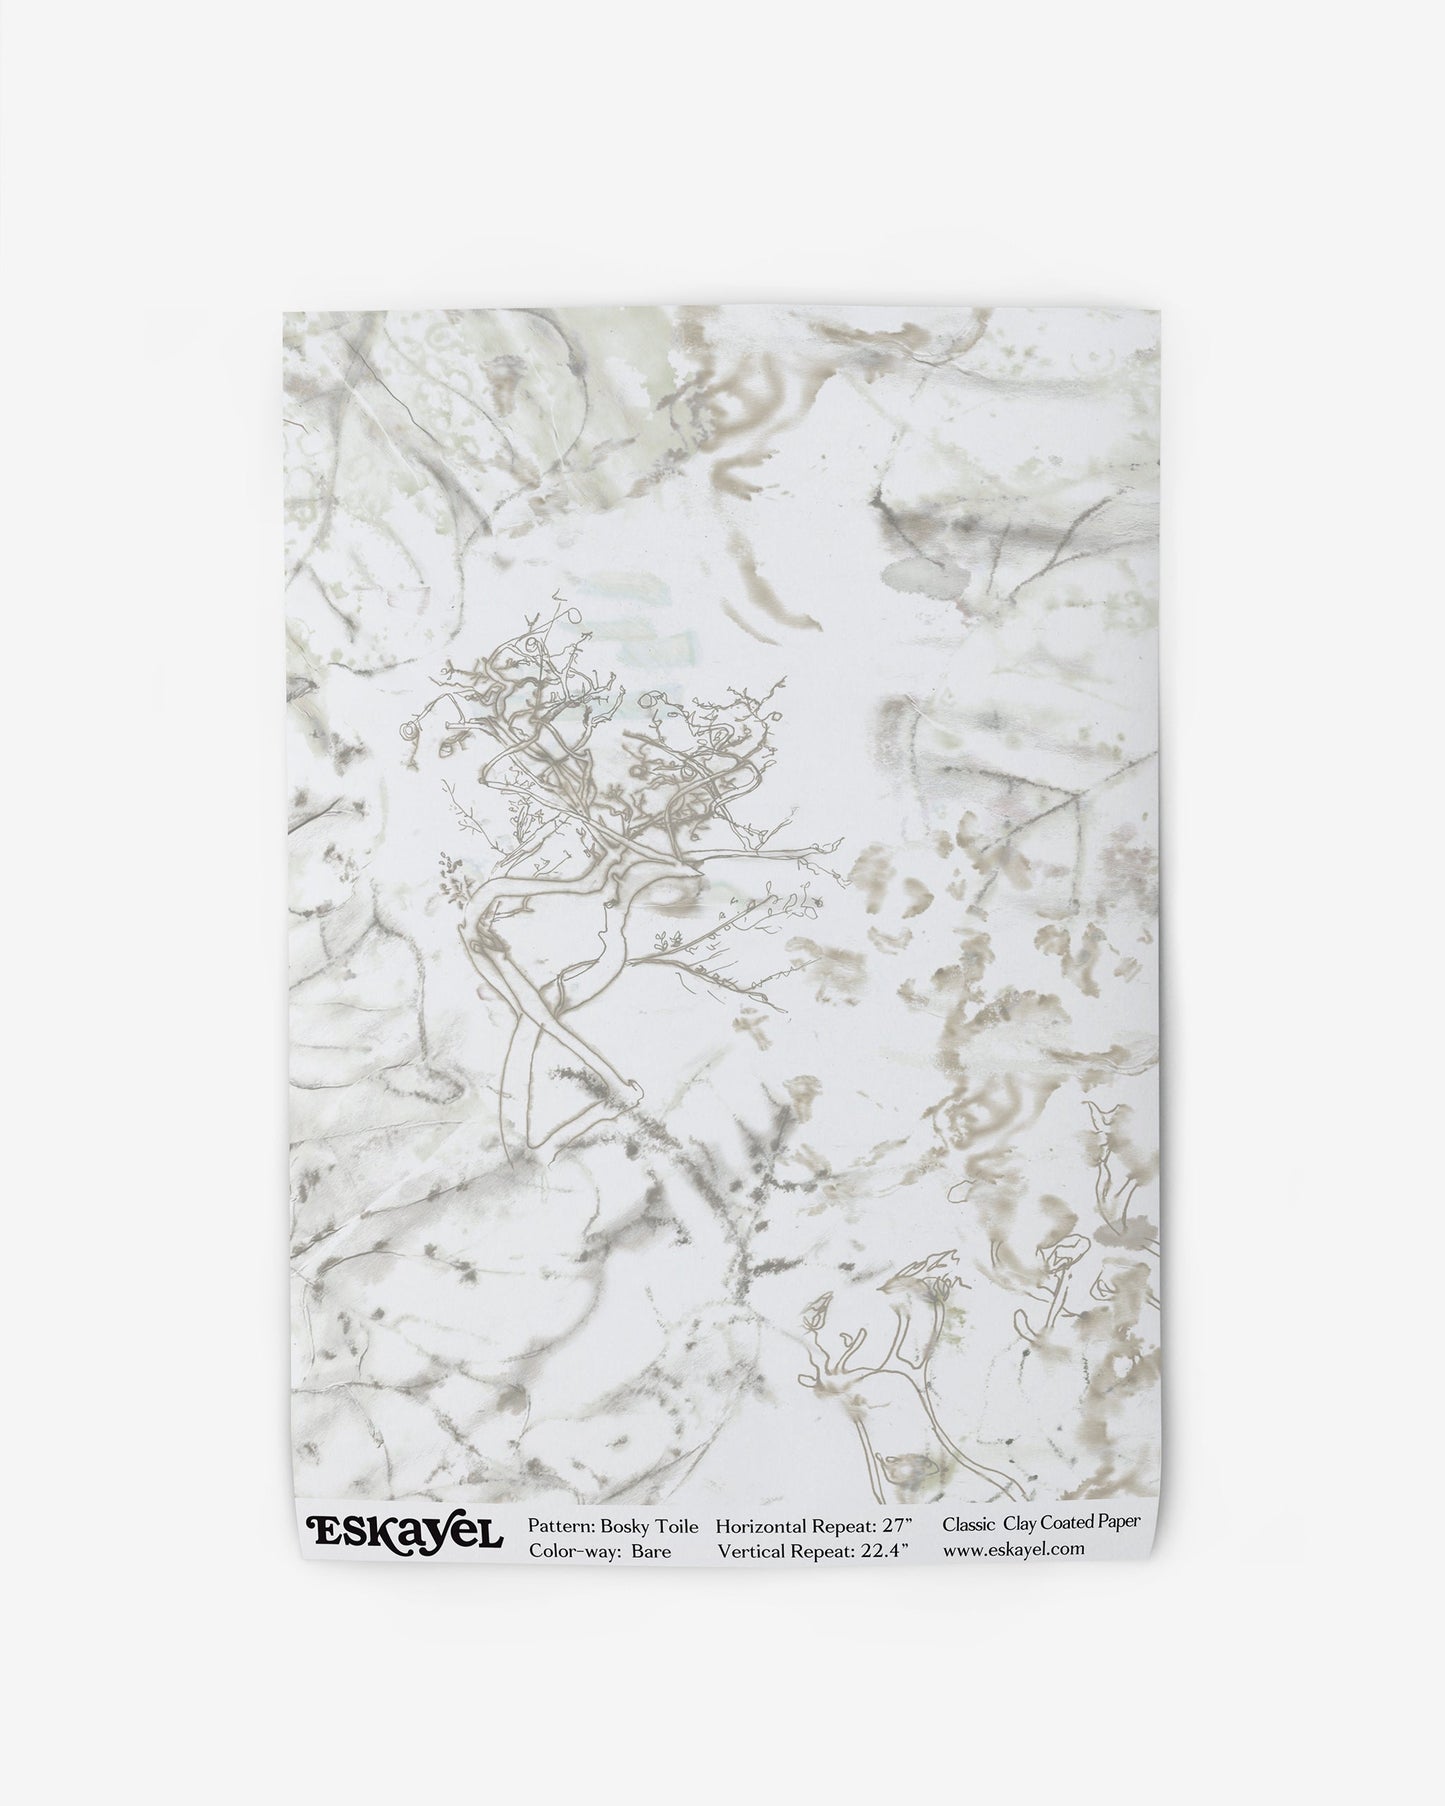 A Bosky Toile Wallpaper Sample Bare with a drawing of a horse on it